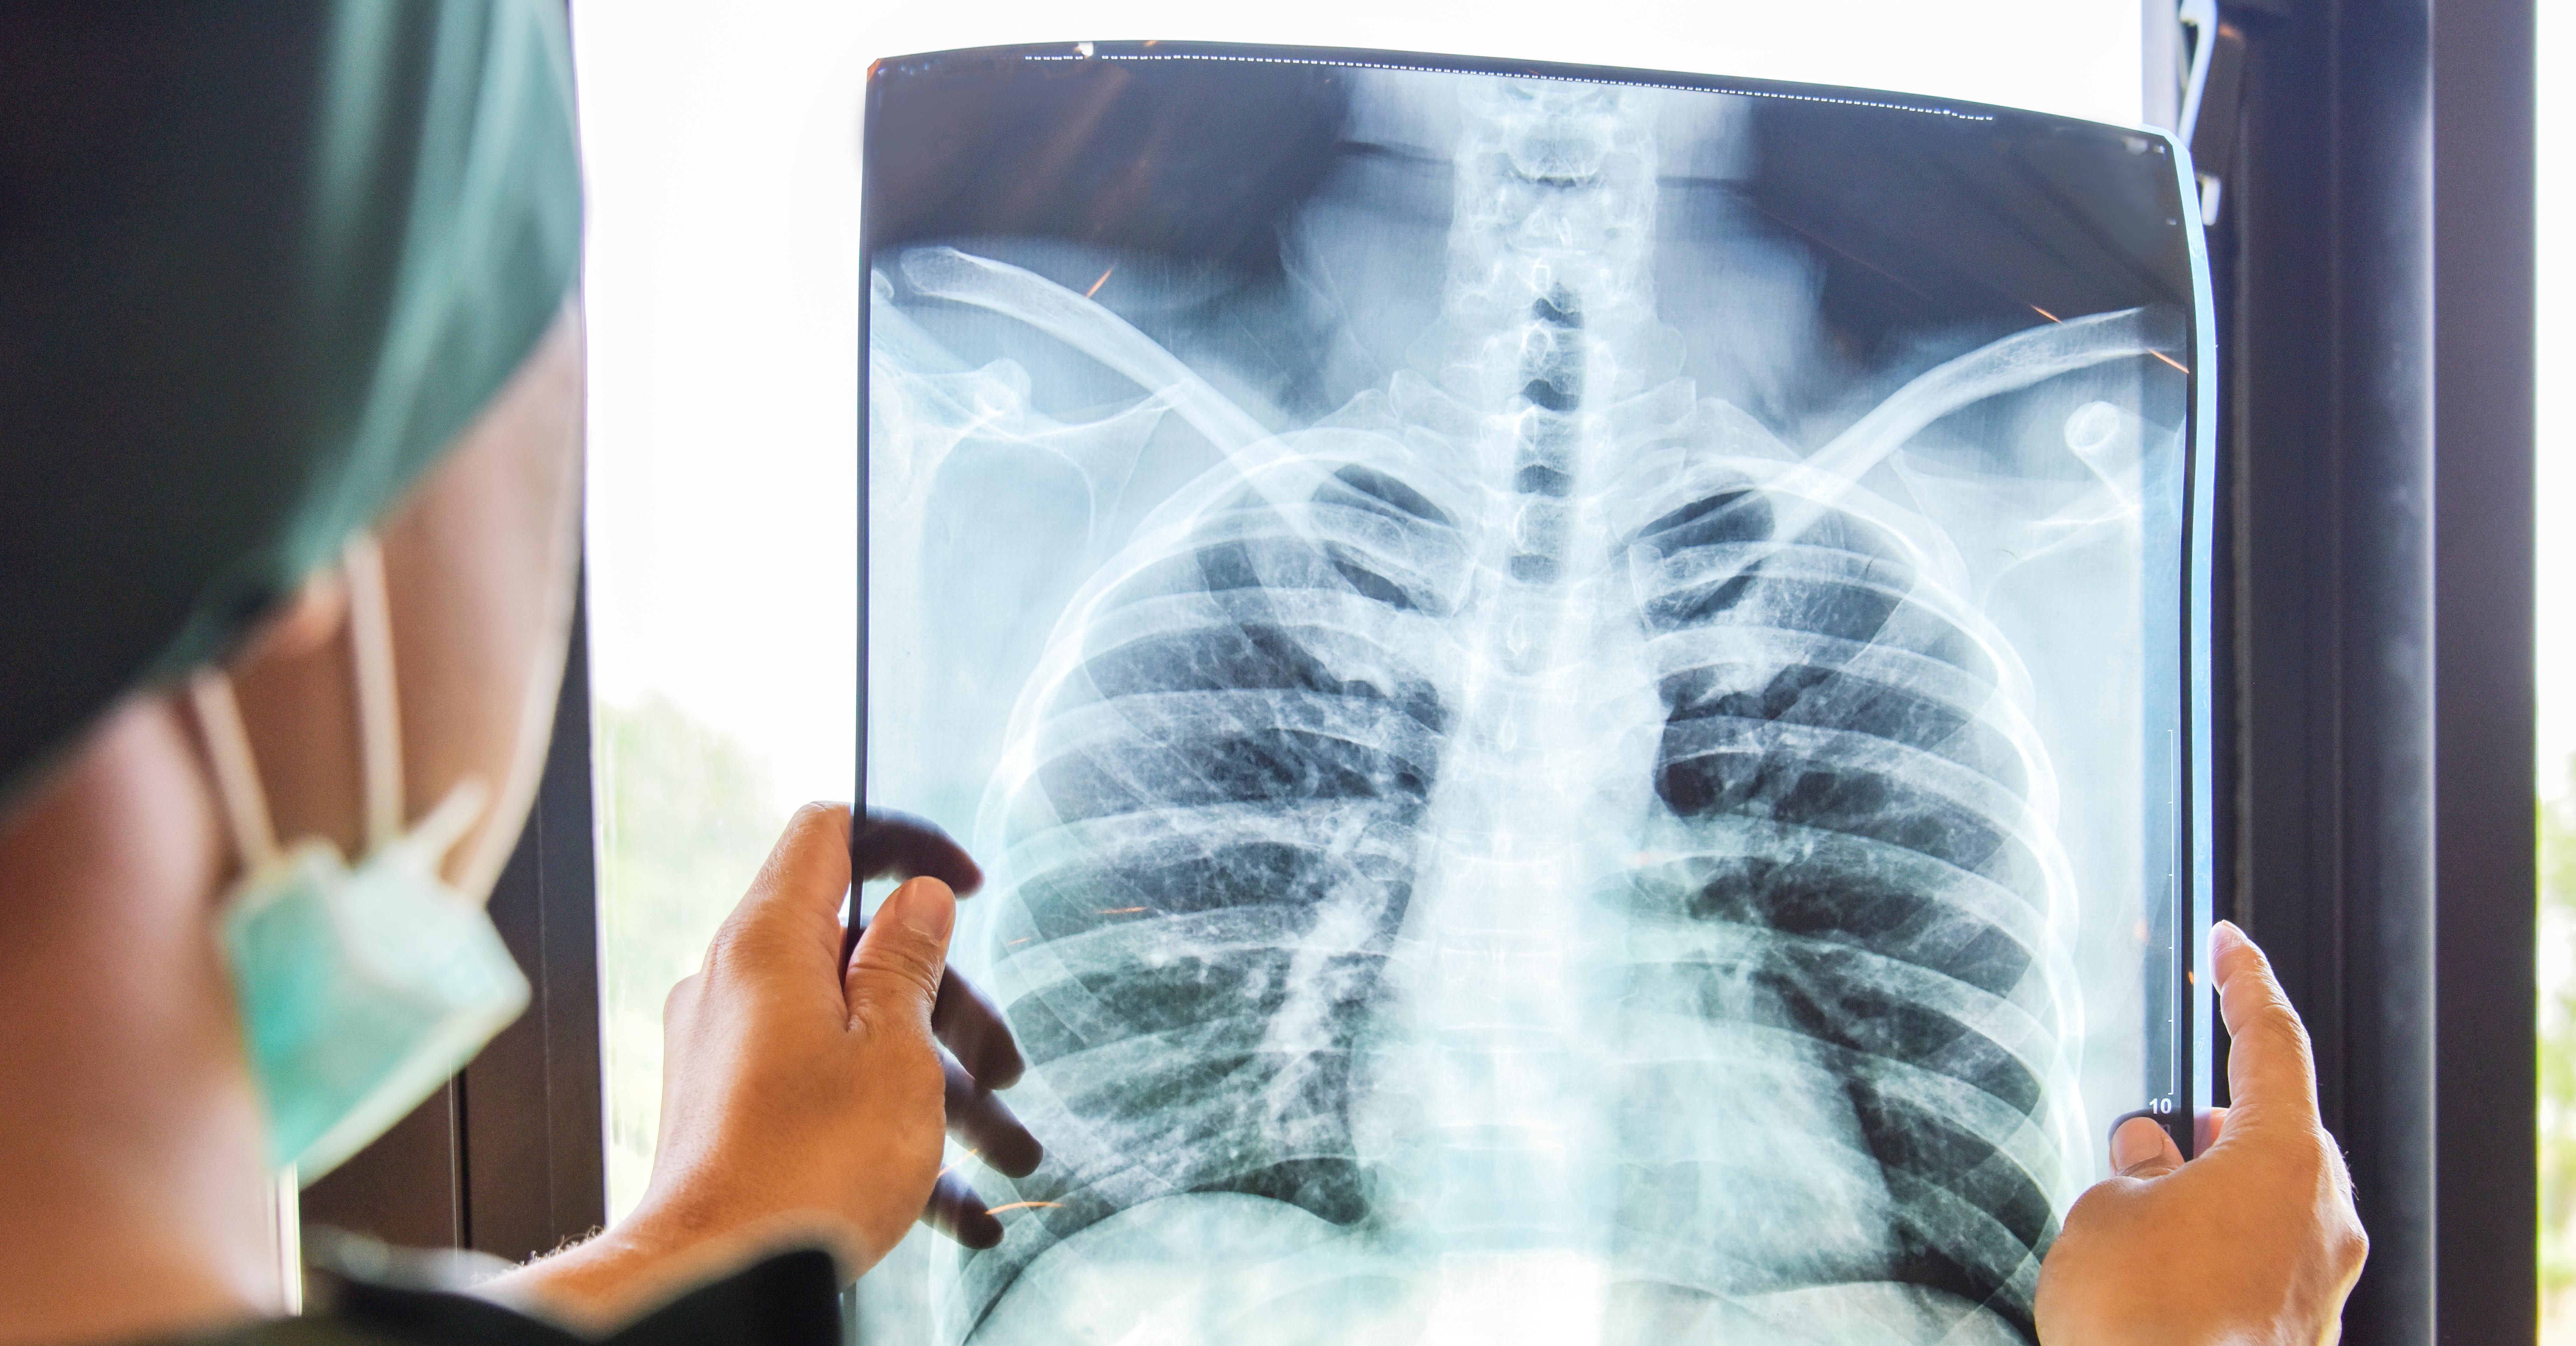 A medical professional holds onto a chest x-ray and examines the image.